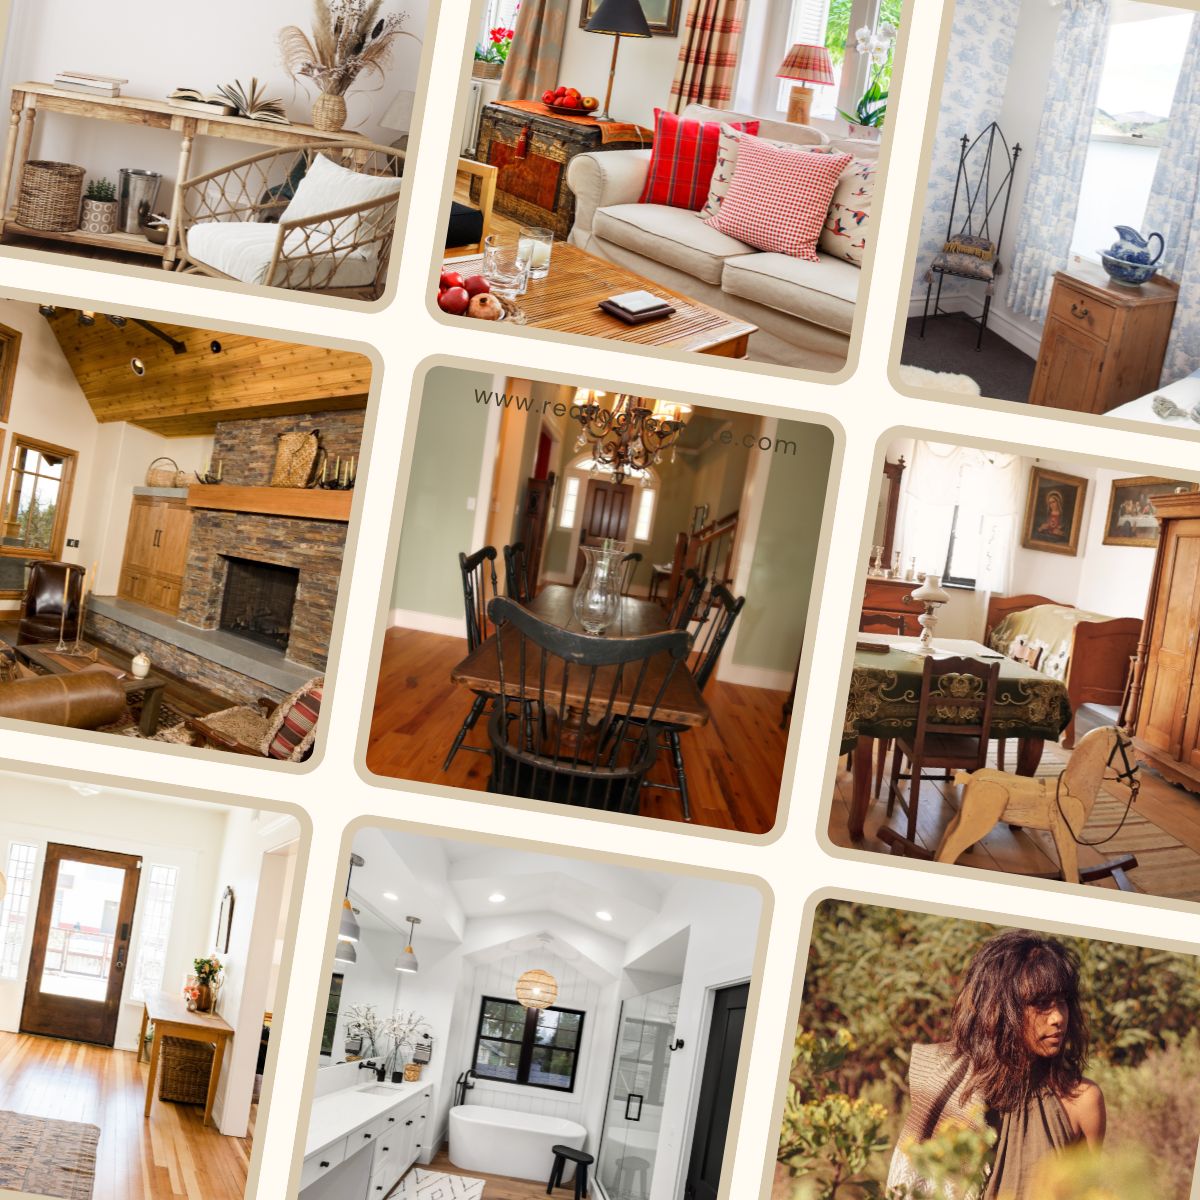 What Are The Differences Between Country Decor Styles